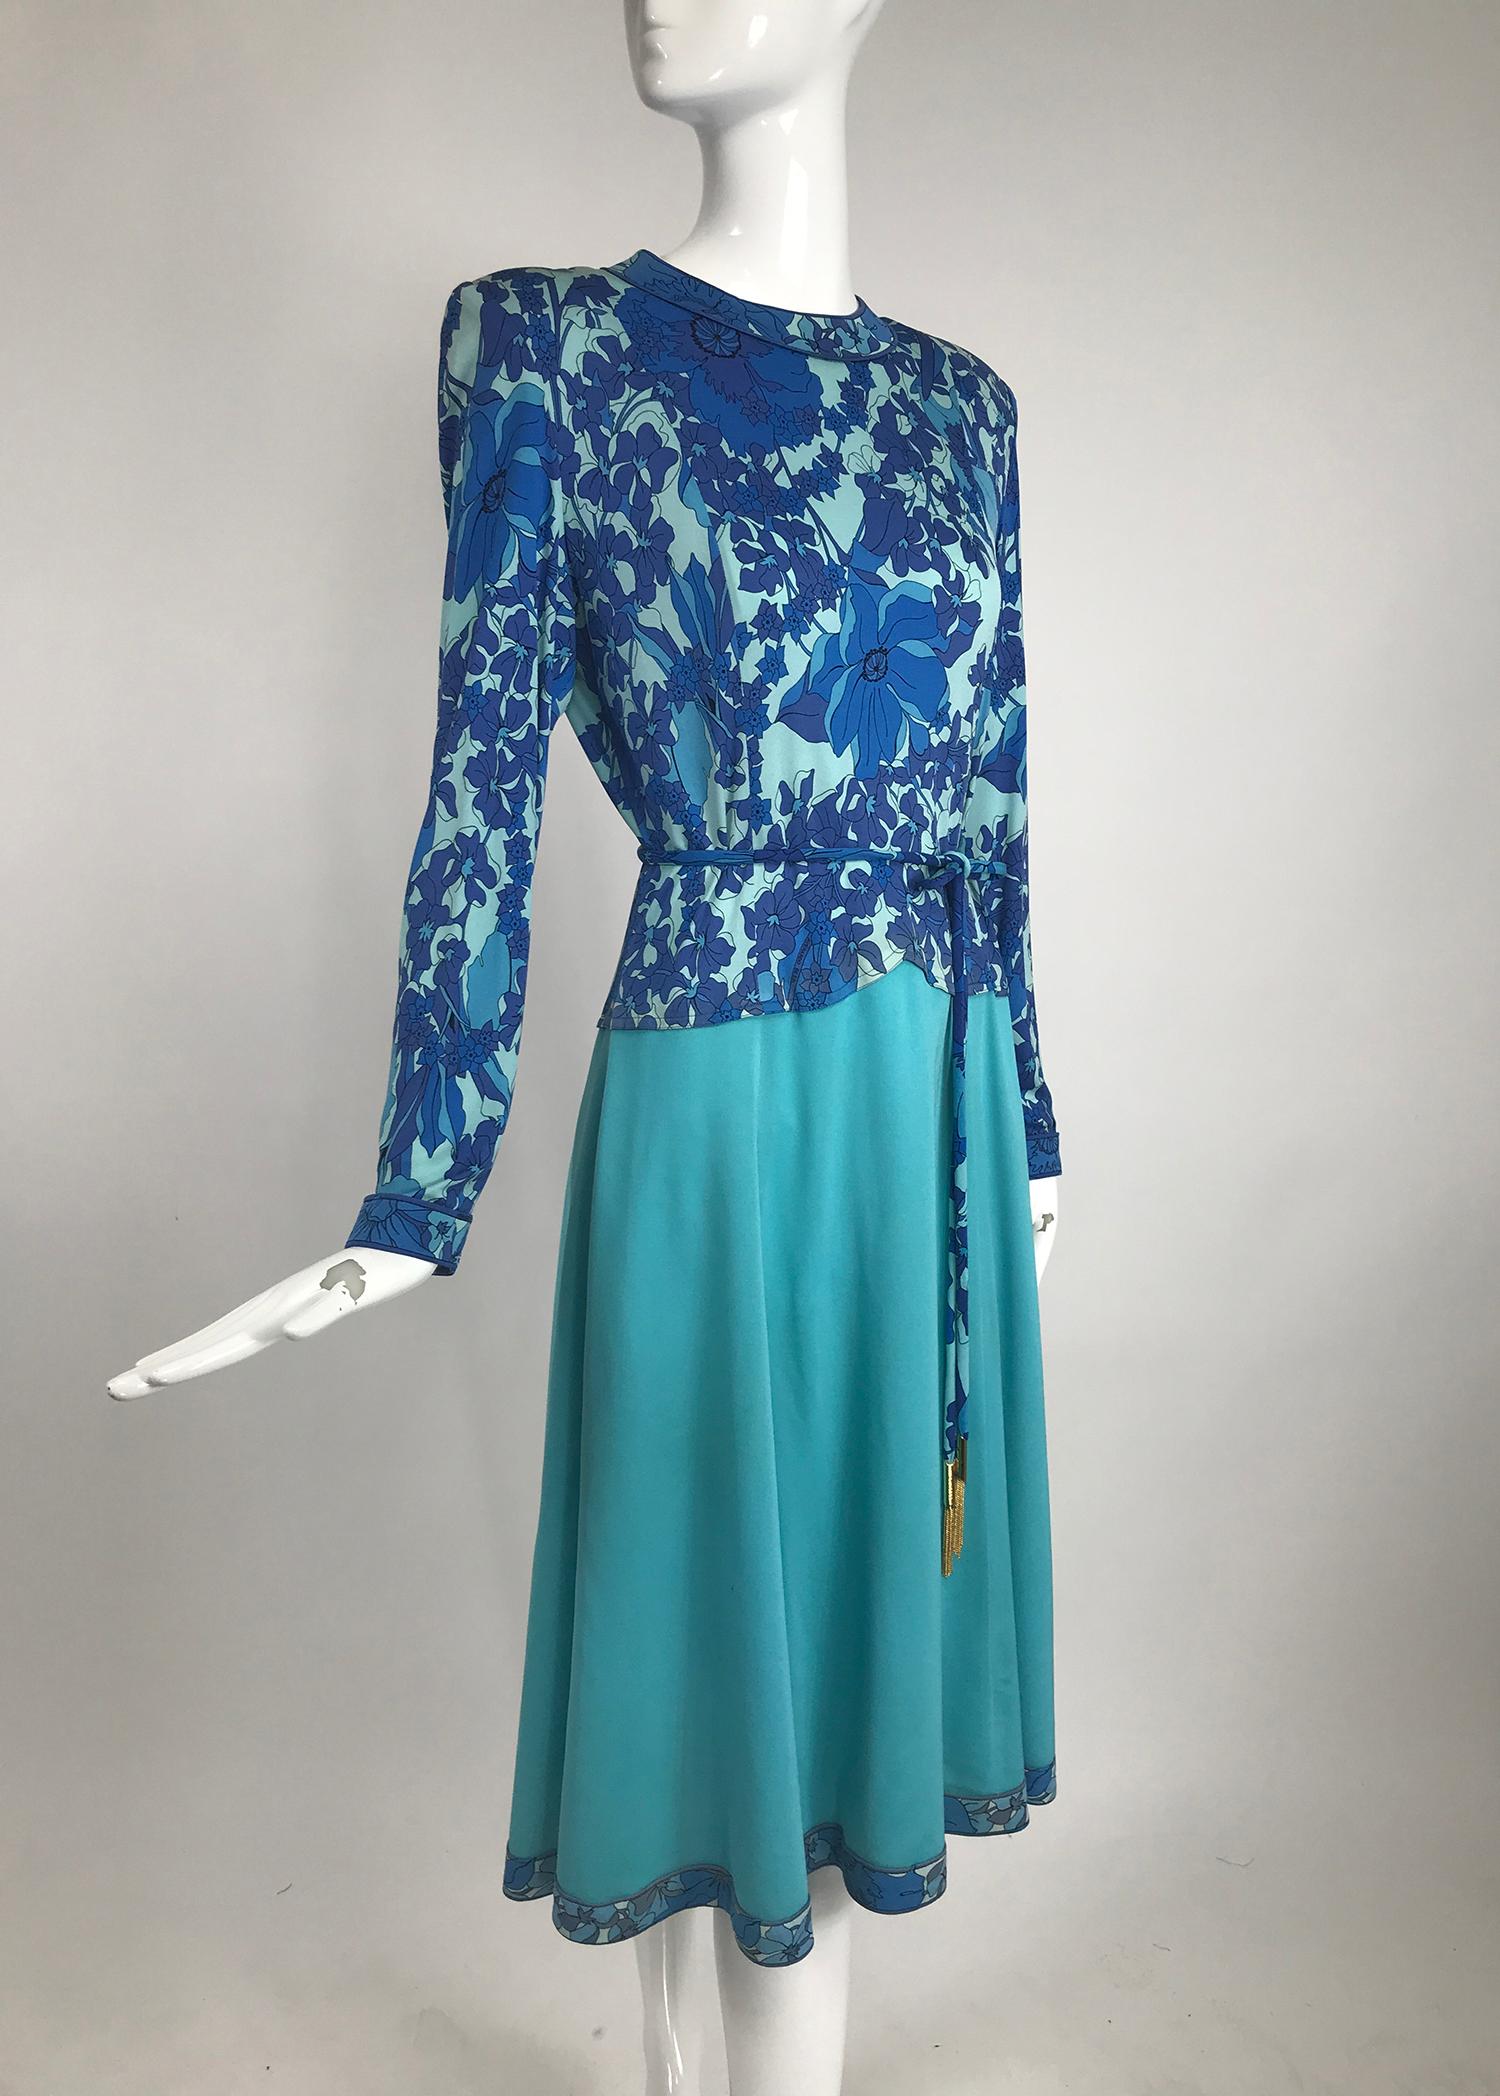 Vintage Averado Bessi turquoise print silk jersey dress and belt. Vibrant print in the style of Pucci, this Bessi Dress is perfect for any occasion. Banded jewel neckline, long sleeves with banded cuffs, the bodice and hip is done in the print, the